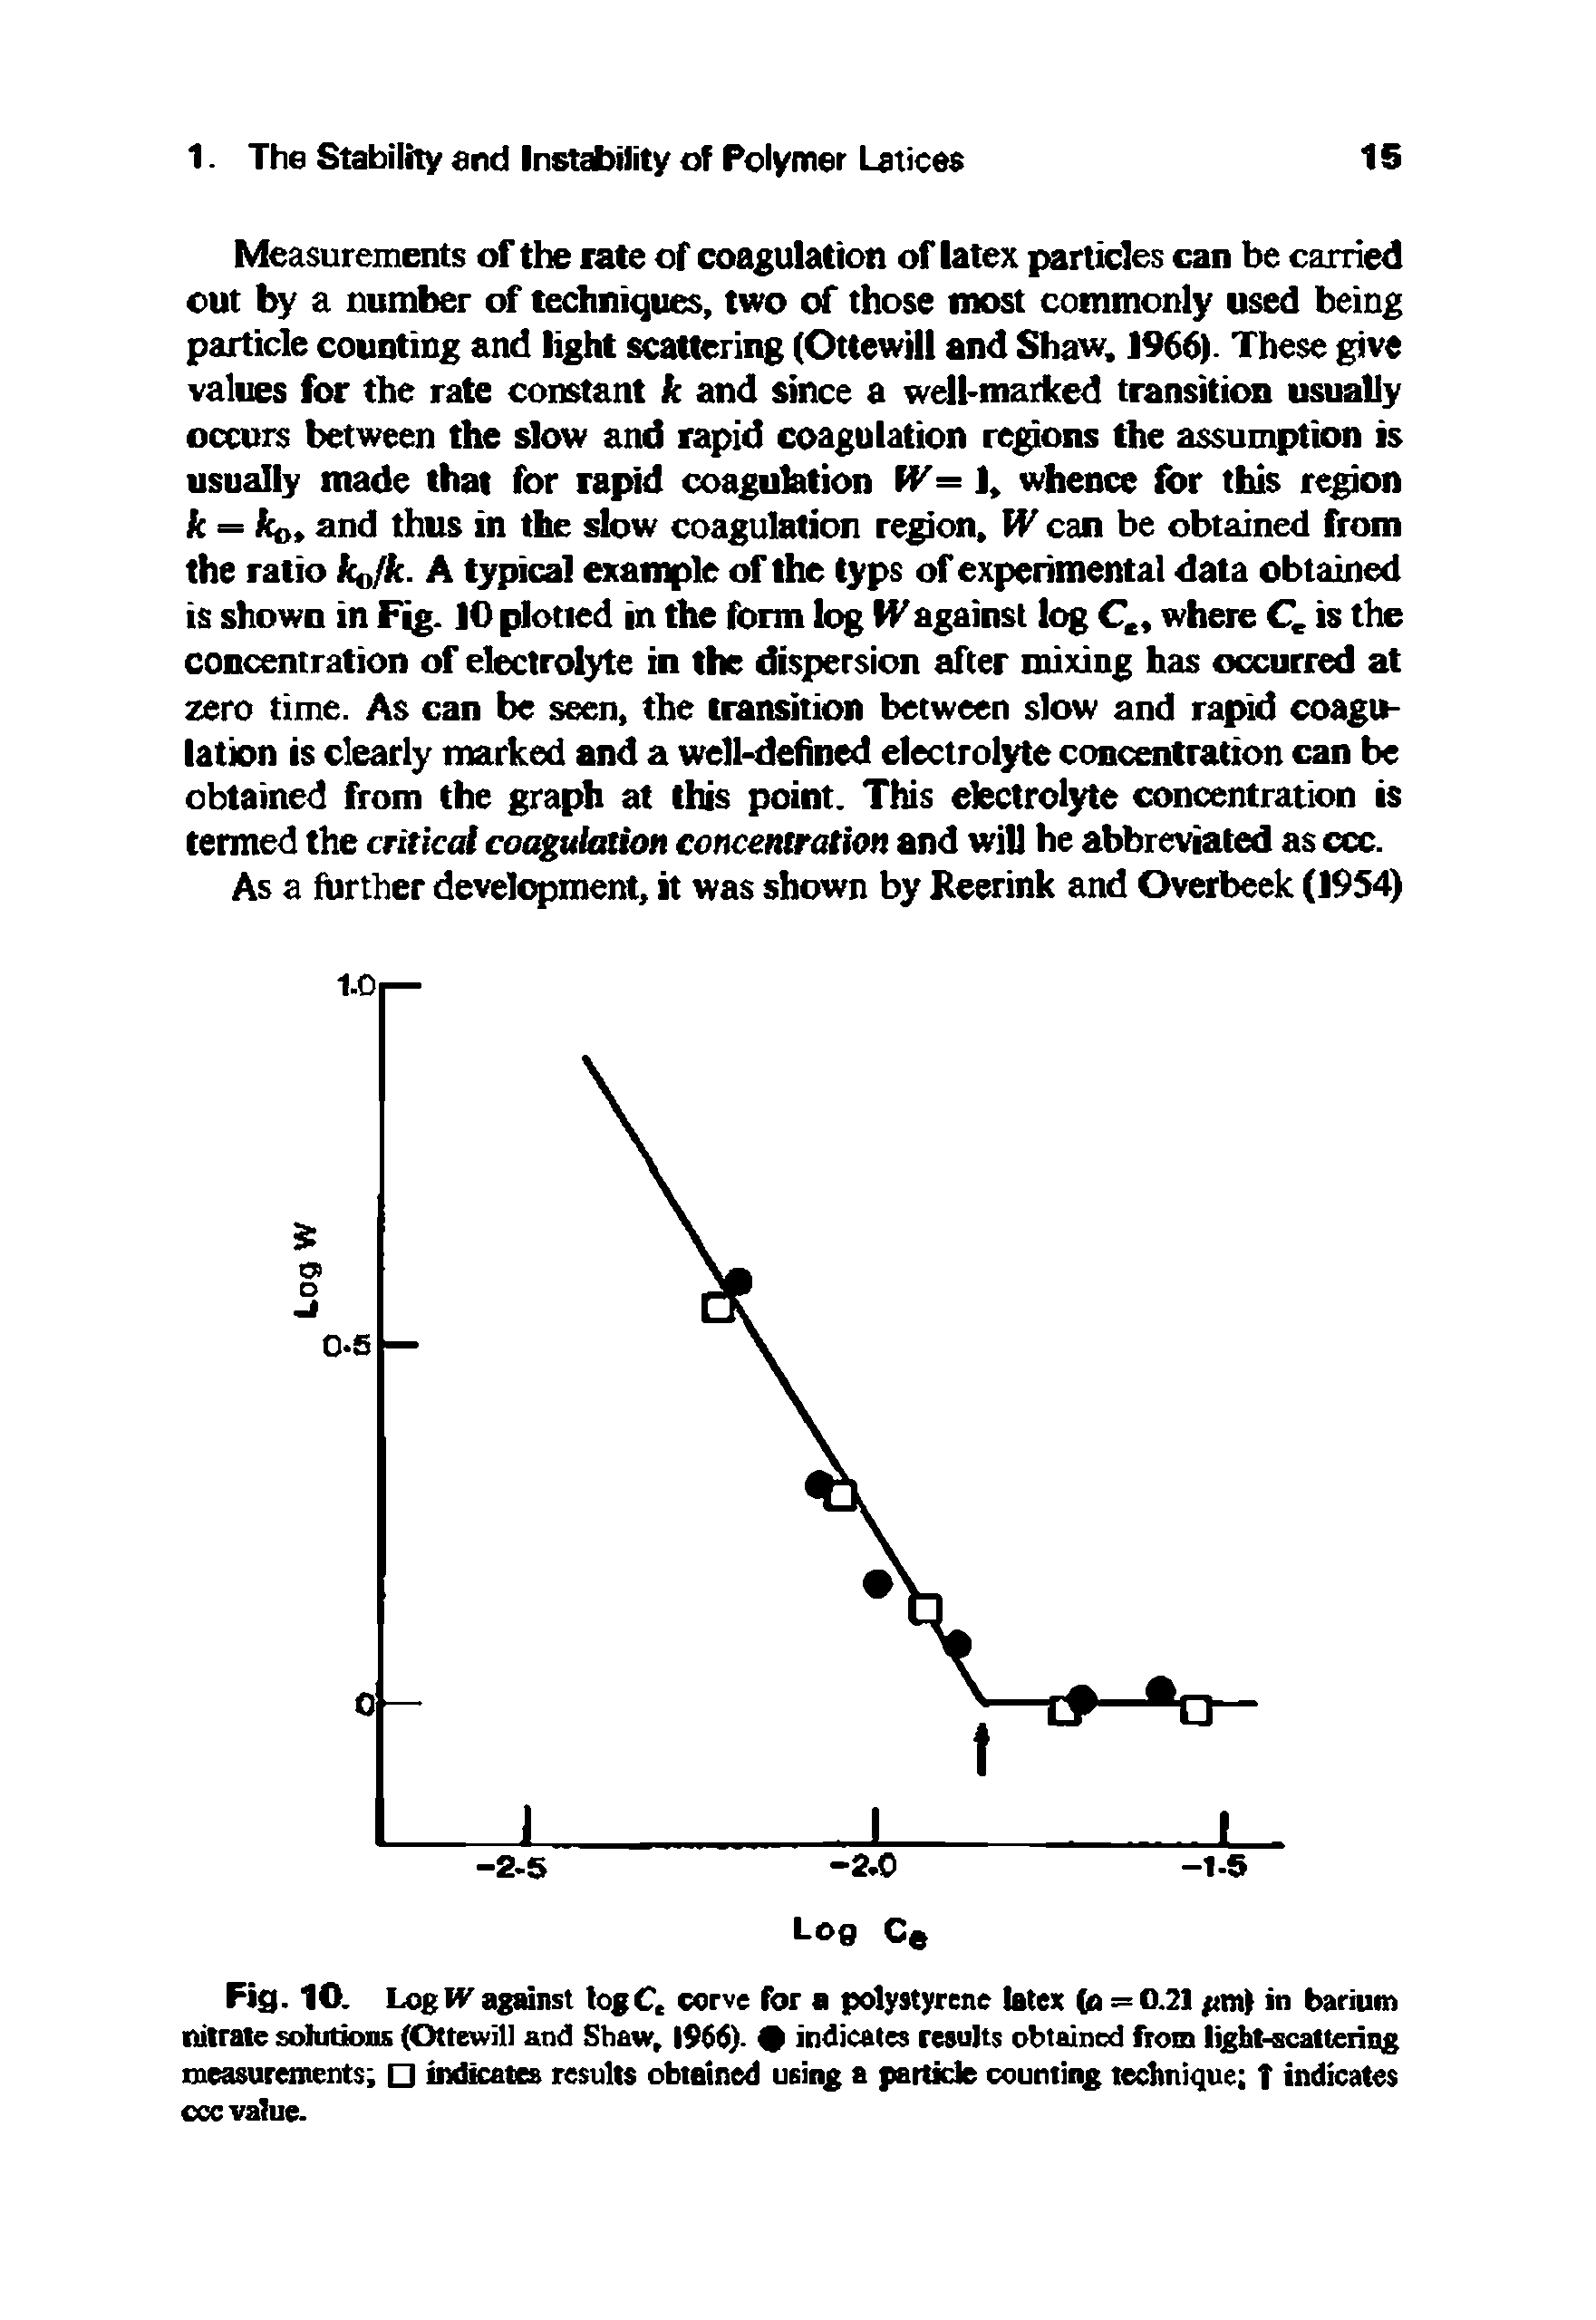 Fig. 10. LogIV agwnst togC. corve for a polystyrene latex (a = 0.21 <m) in barium nitrate sohitioiui (Ottewili and Shaw, 1966). indicates results obtained from light-scattering neasuretnents indicates results obtained using a particle counting technique T indicates ccc value.